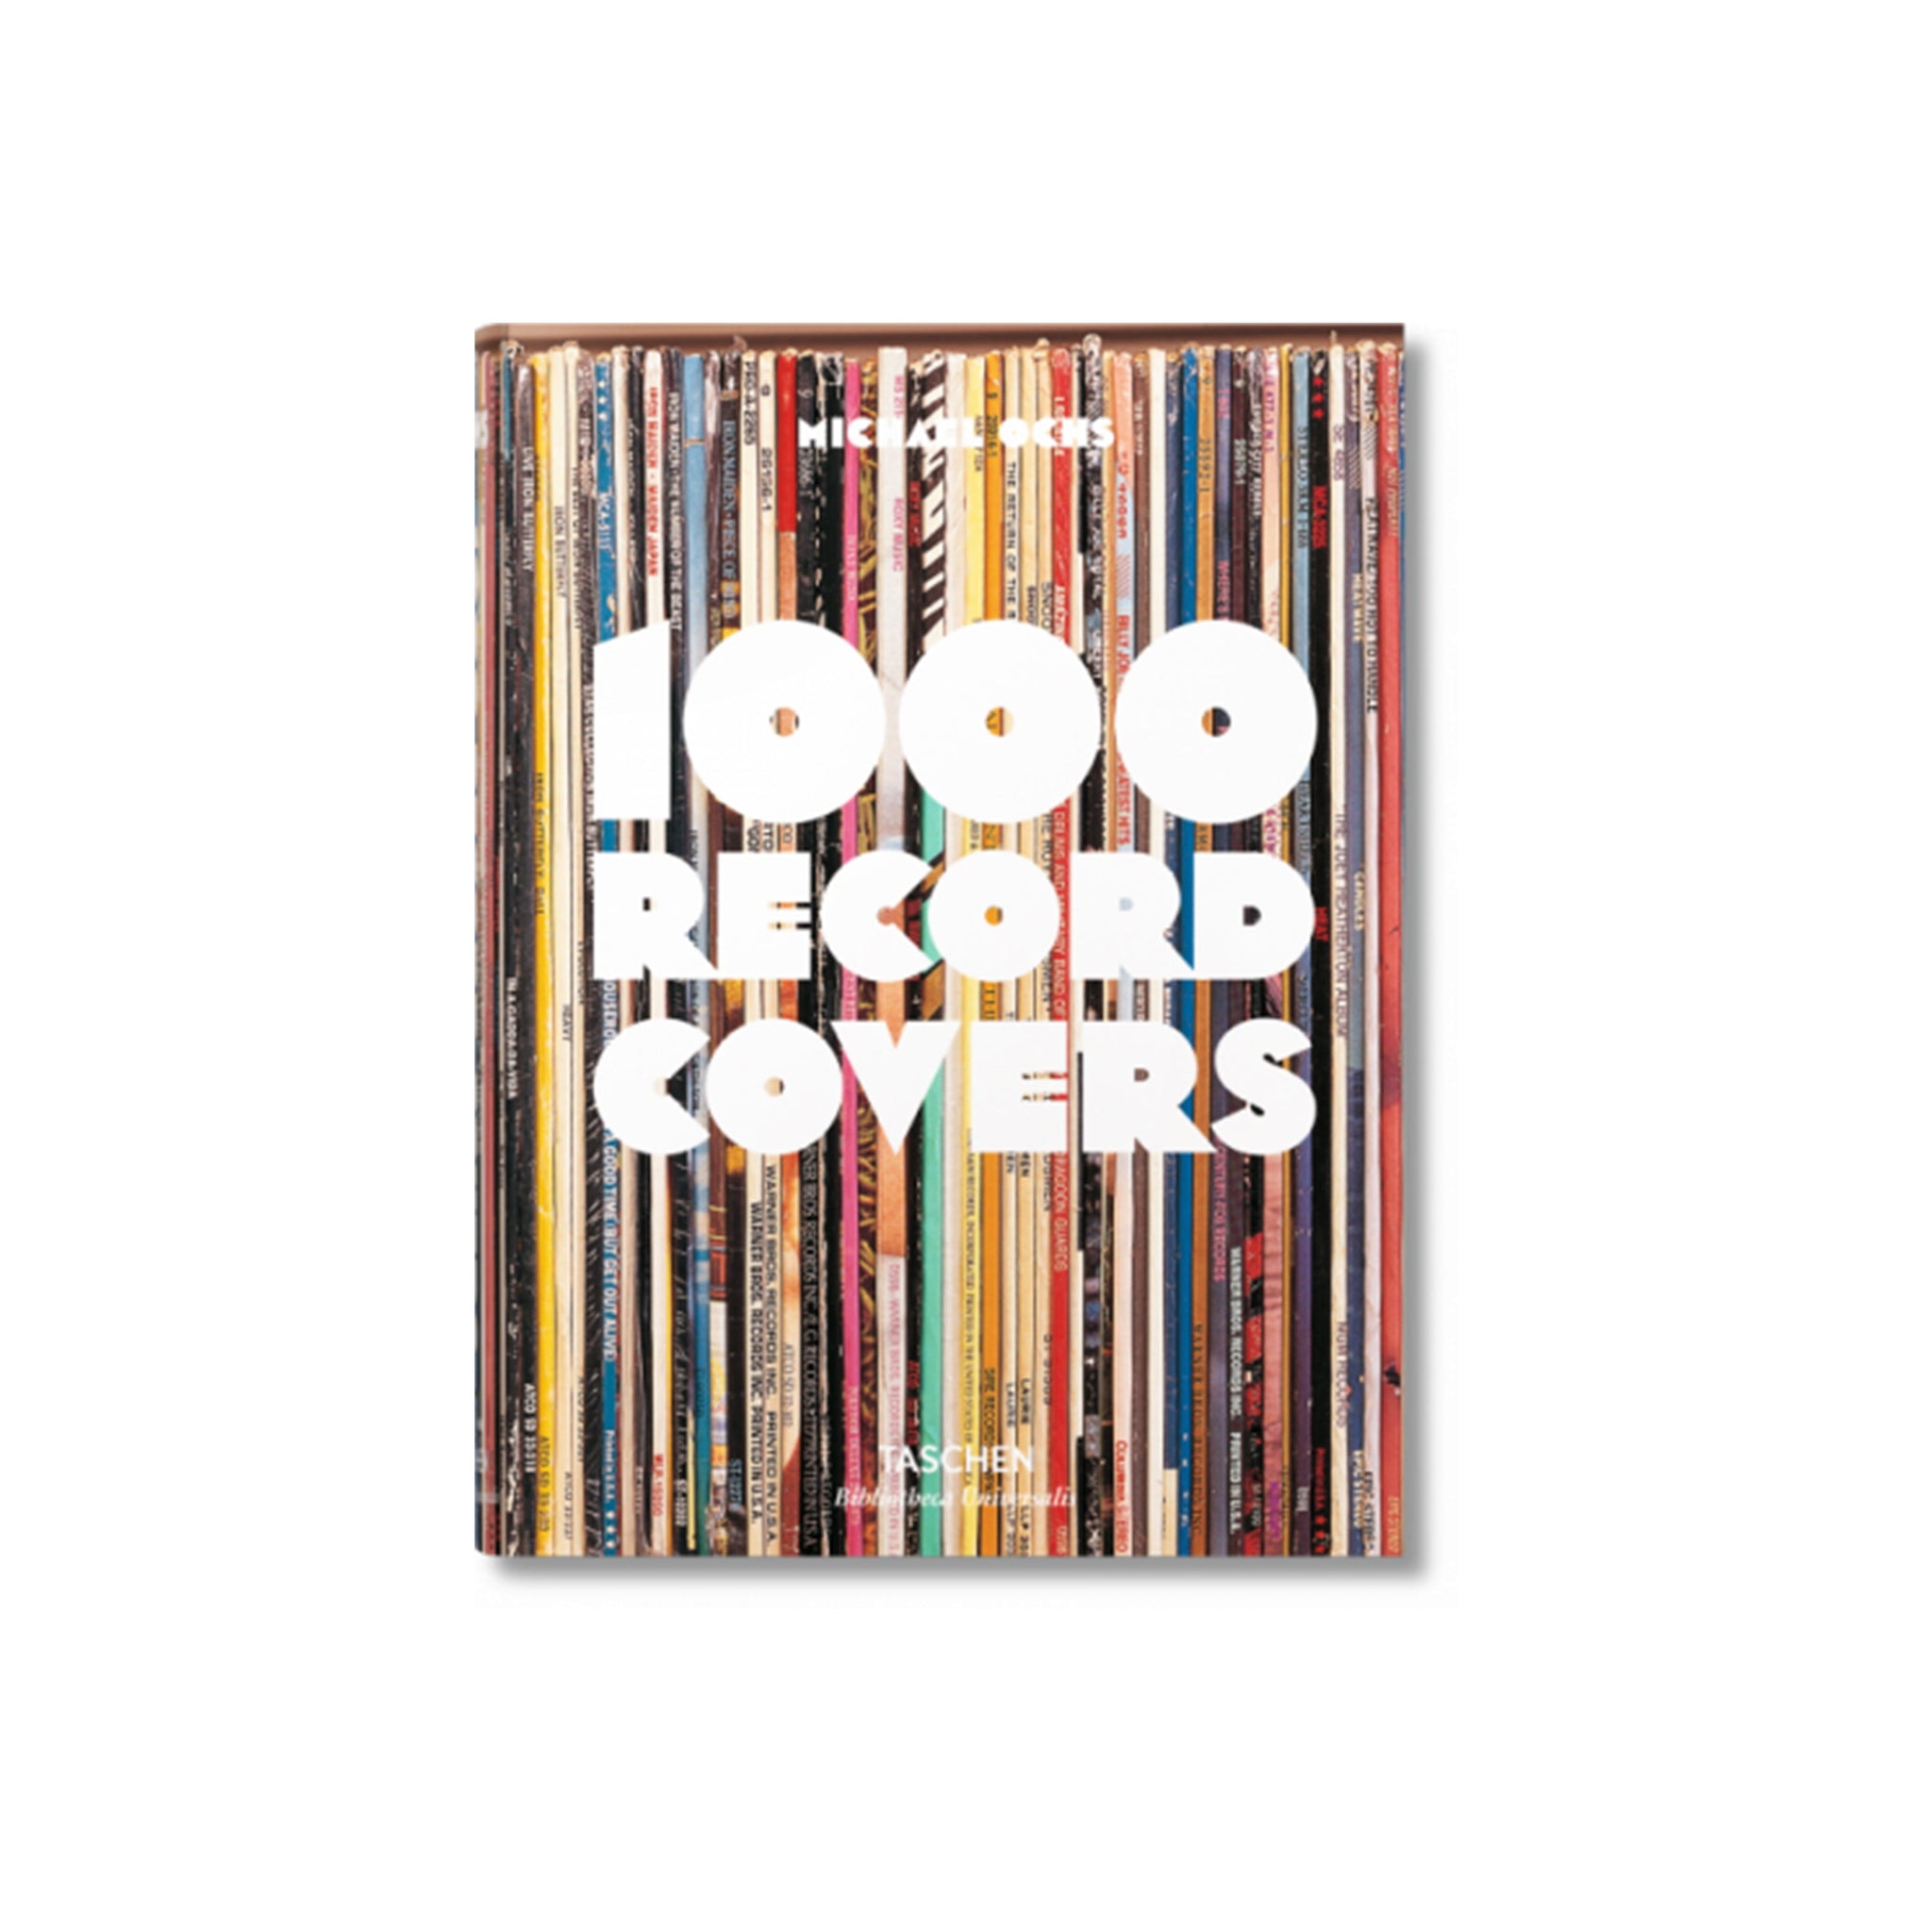 Taschen 1000 Record Covers